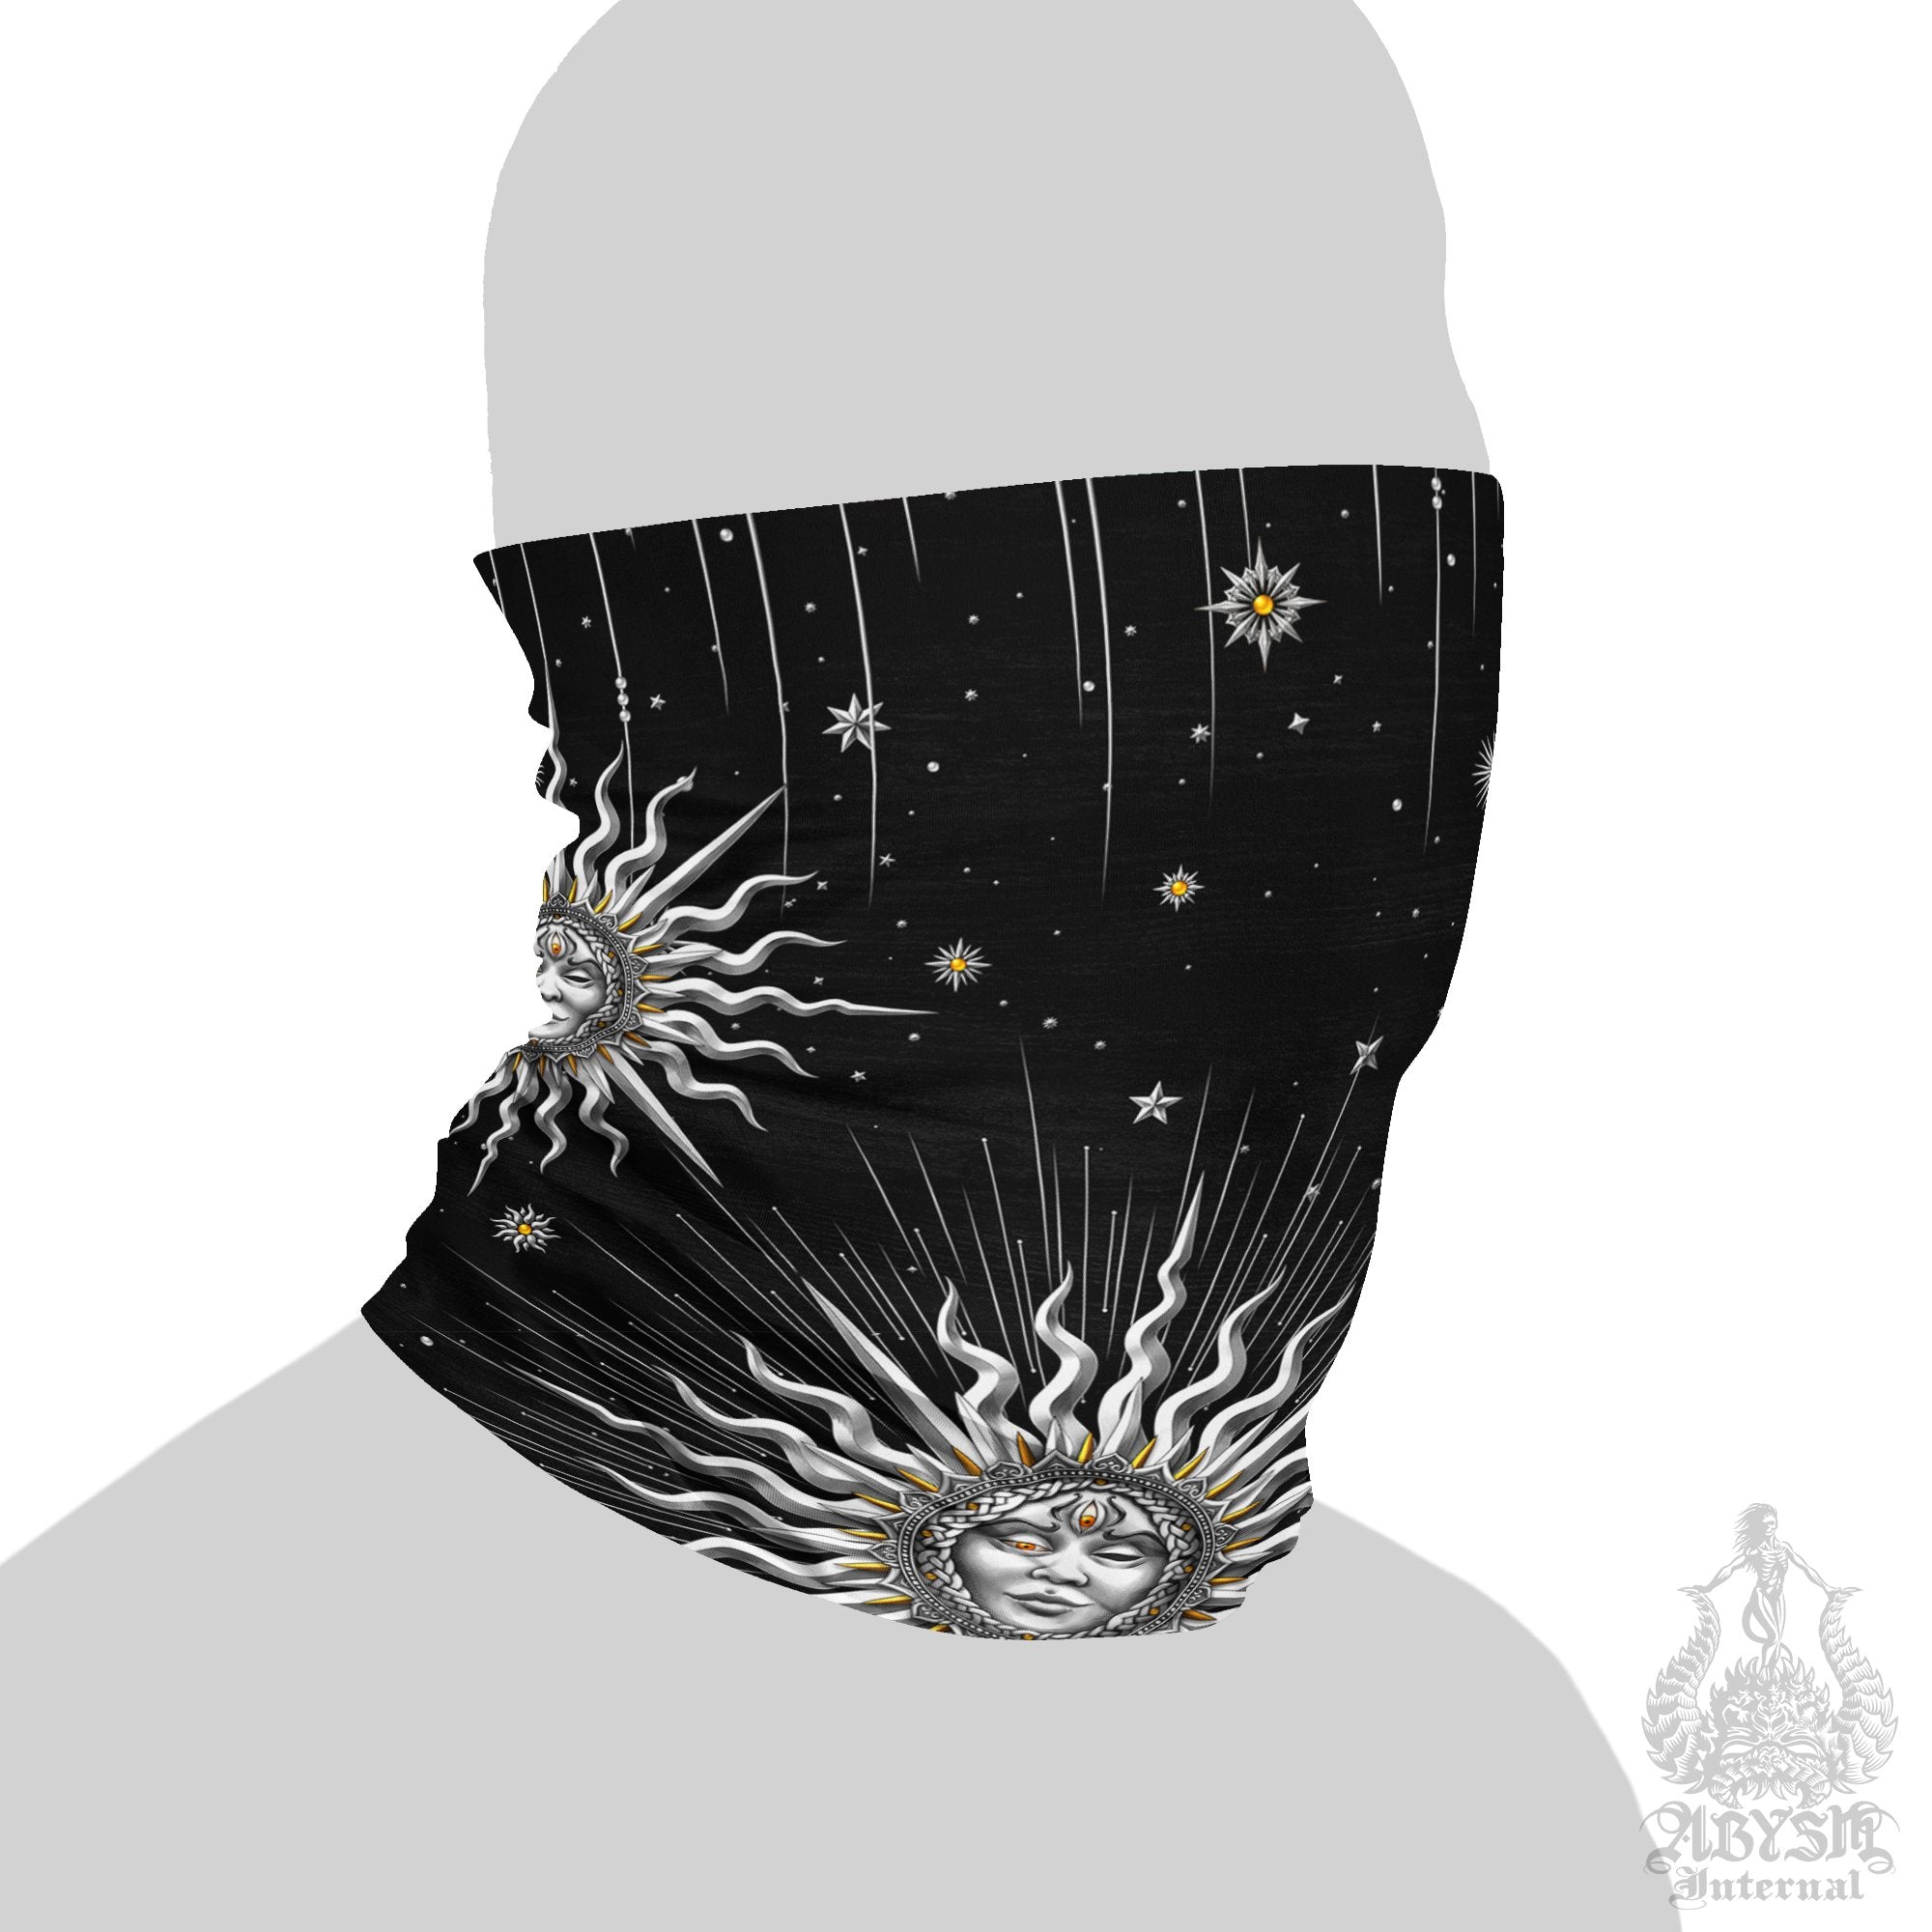 Silver Sun Neck Gaiter, Tarot Arcana Face Mask, Boho Printed Head Covering, Indie Outfit - 7 Colors - Abysm Internal